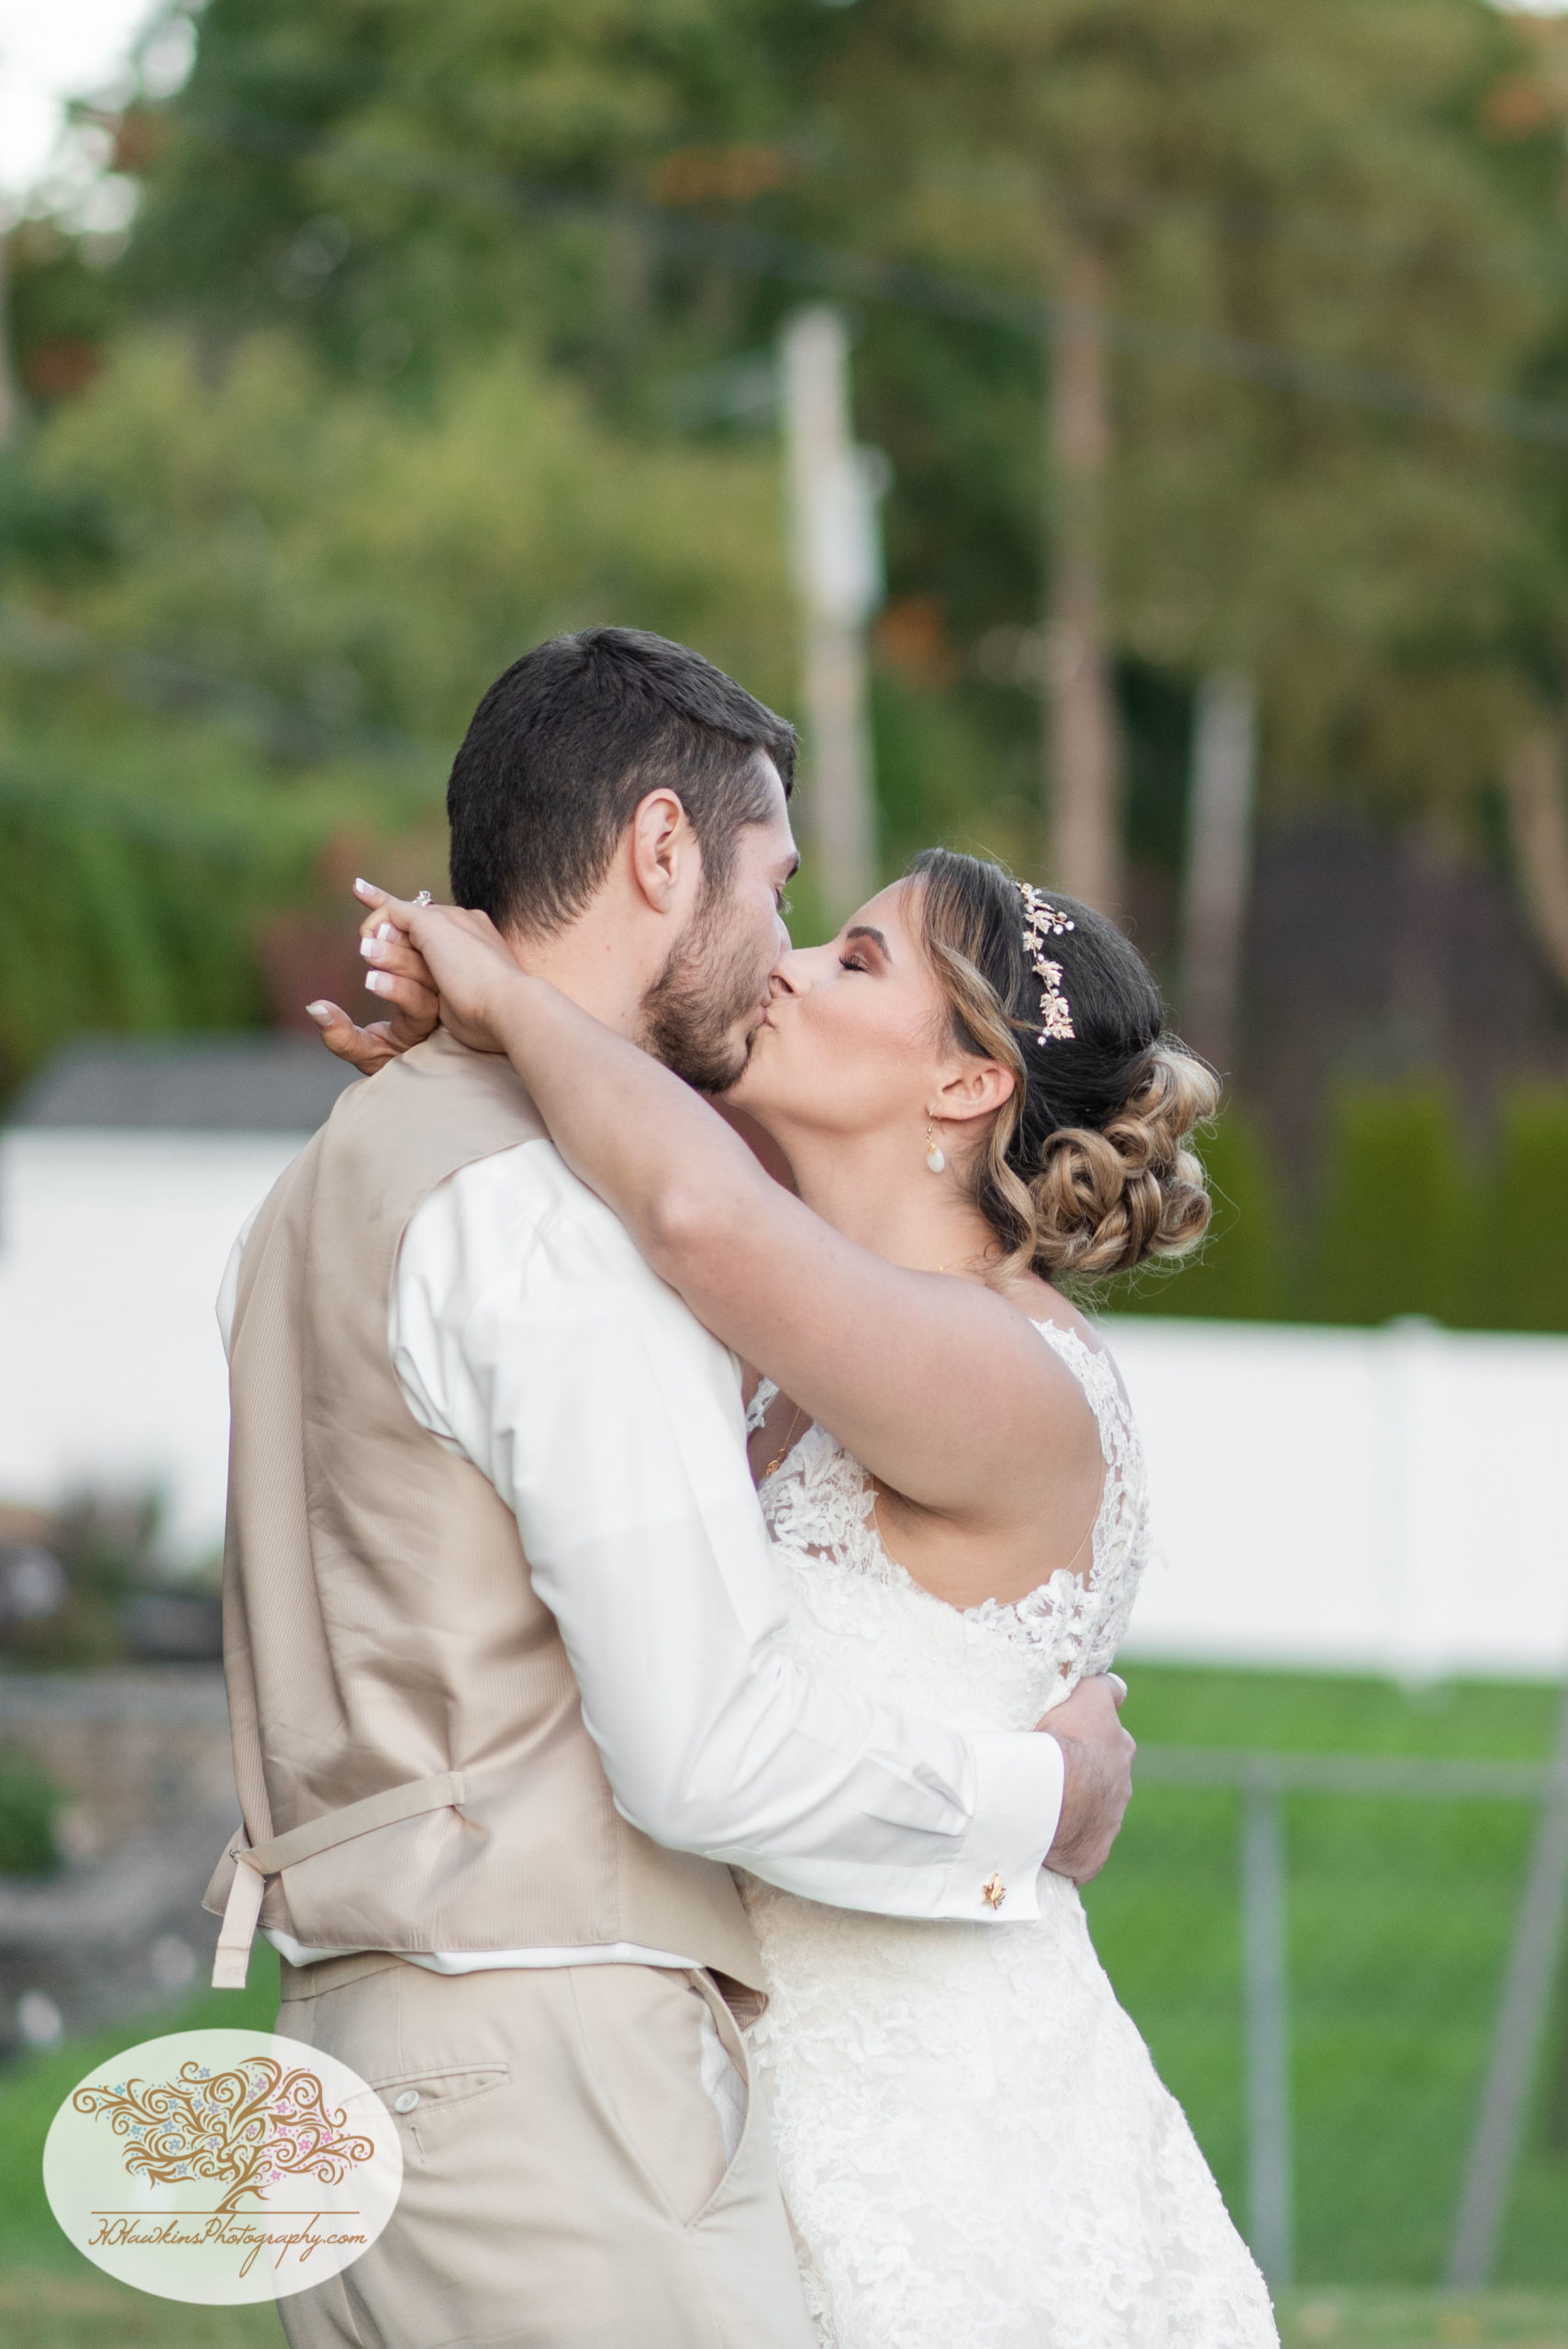 Bride kisses groom at the end of their first dance